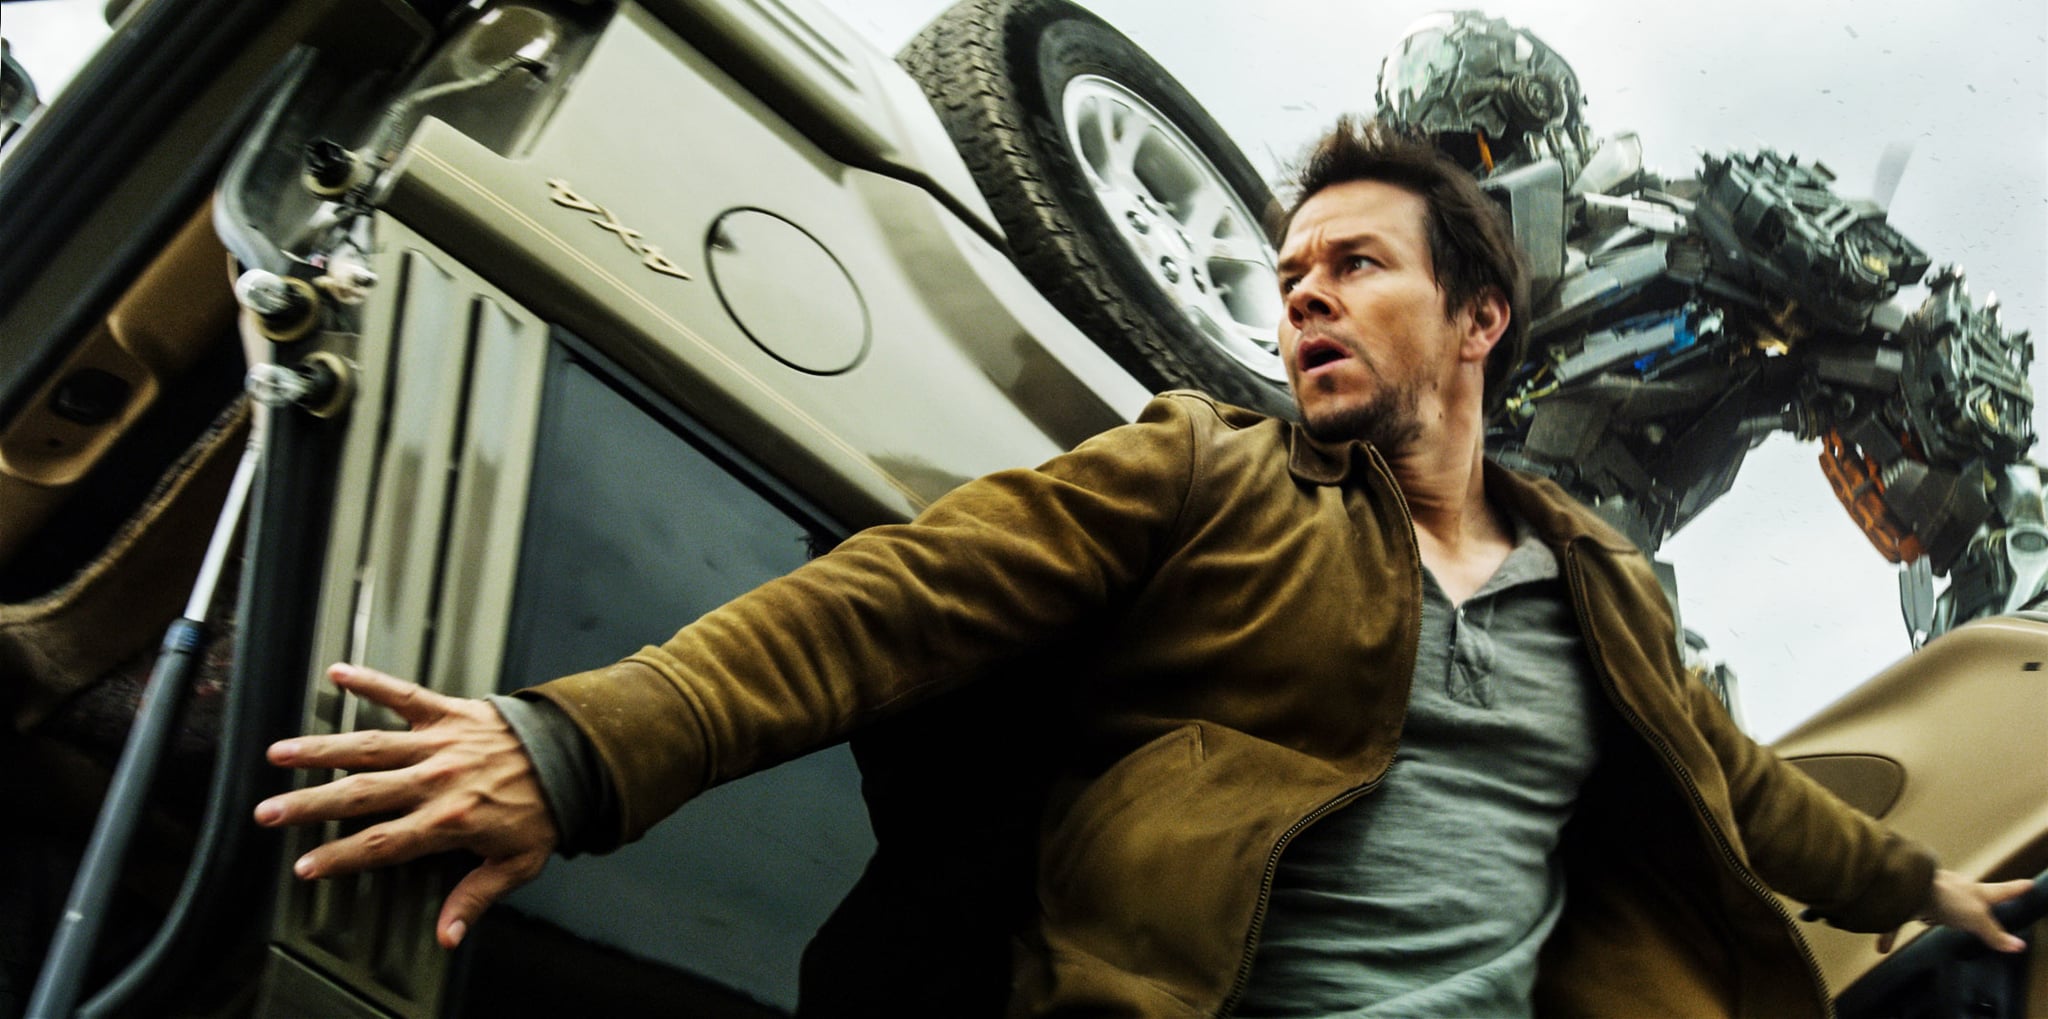 TRANSFORMERS: AGE OF EXTINCTION, Mark Wahlberg, Lockdown, 2014. ph: Industrial Light & Magic/Paramount Pictures/Courtesy Everett Collection